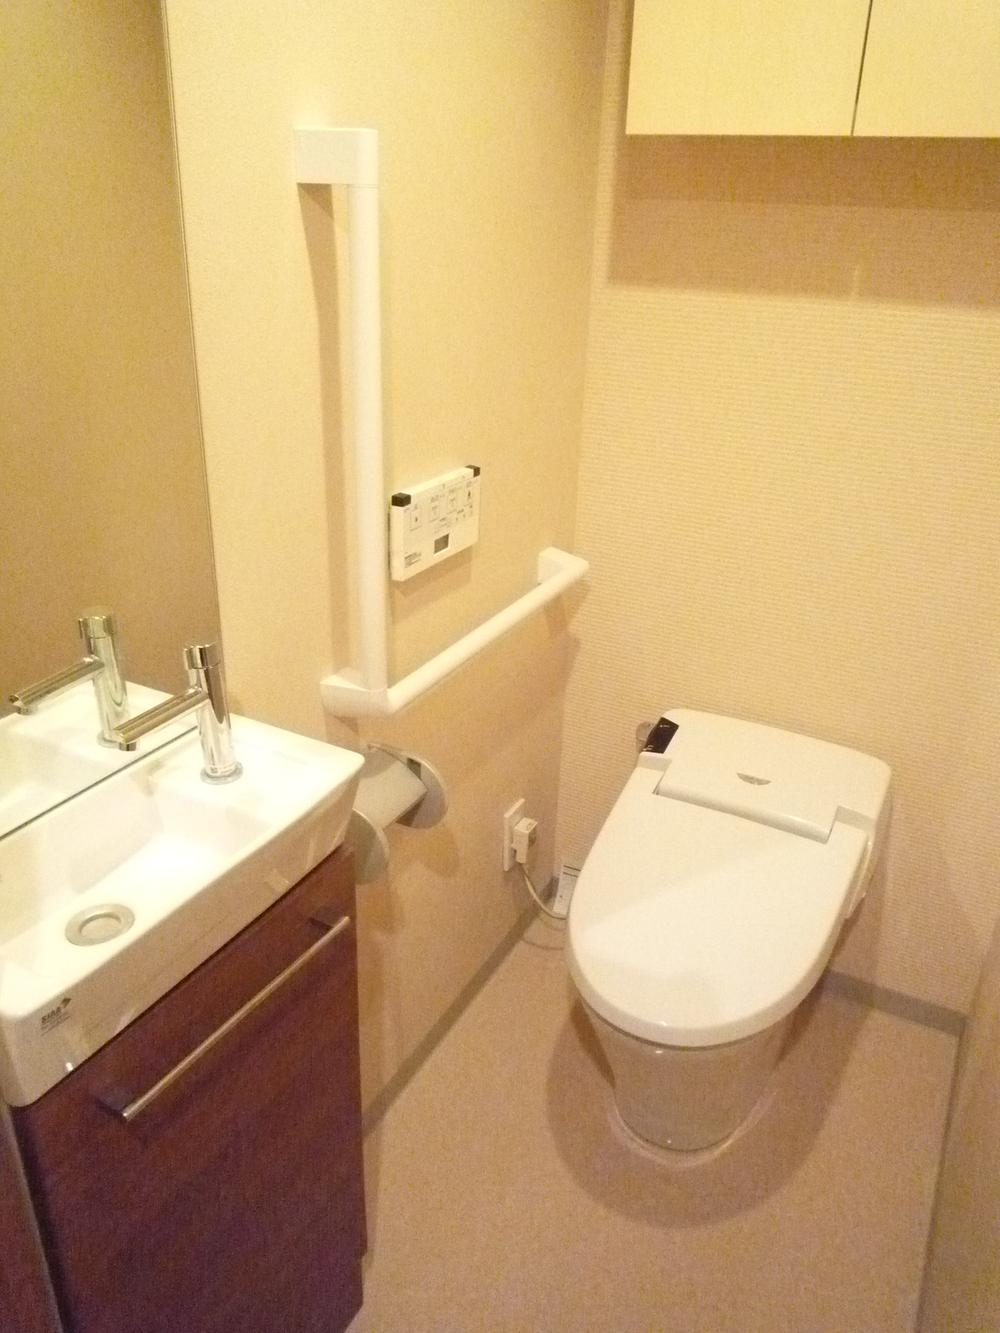 Toilet. Handrail with a tankless toilet (2013 October shooting)